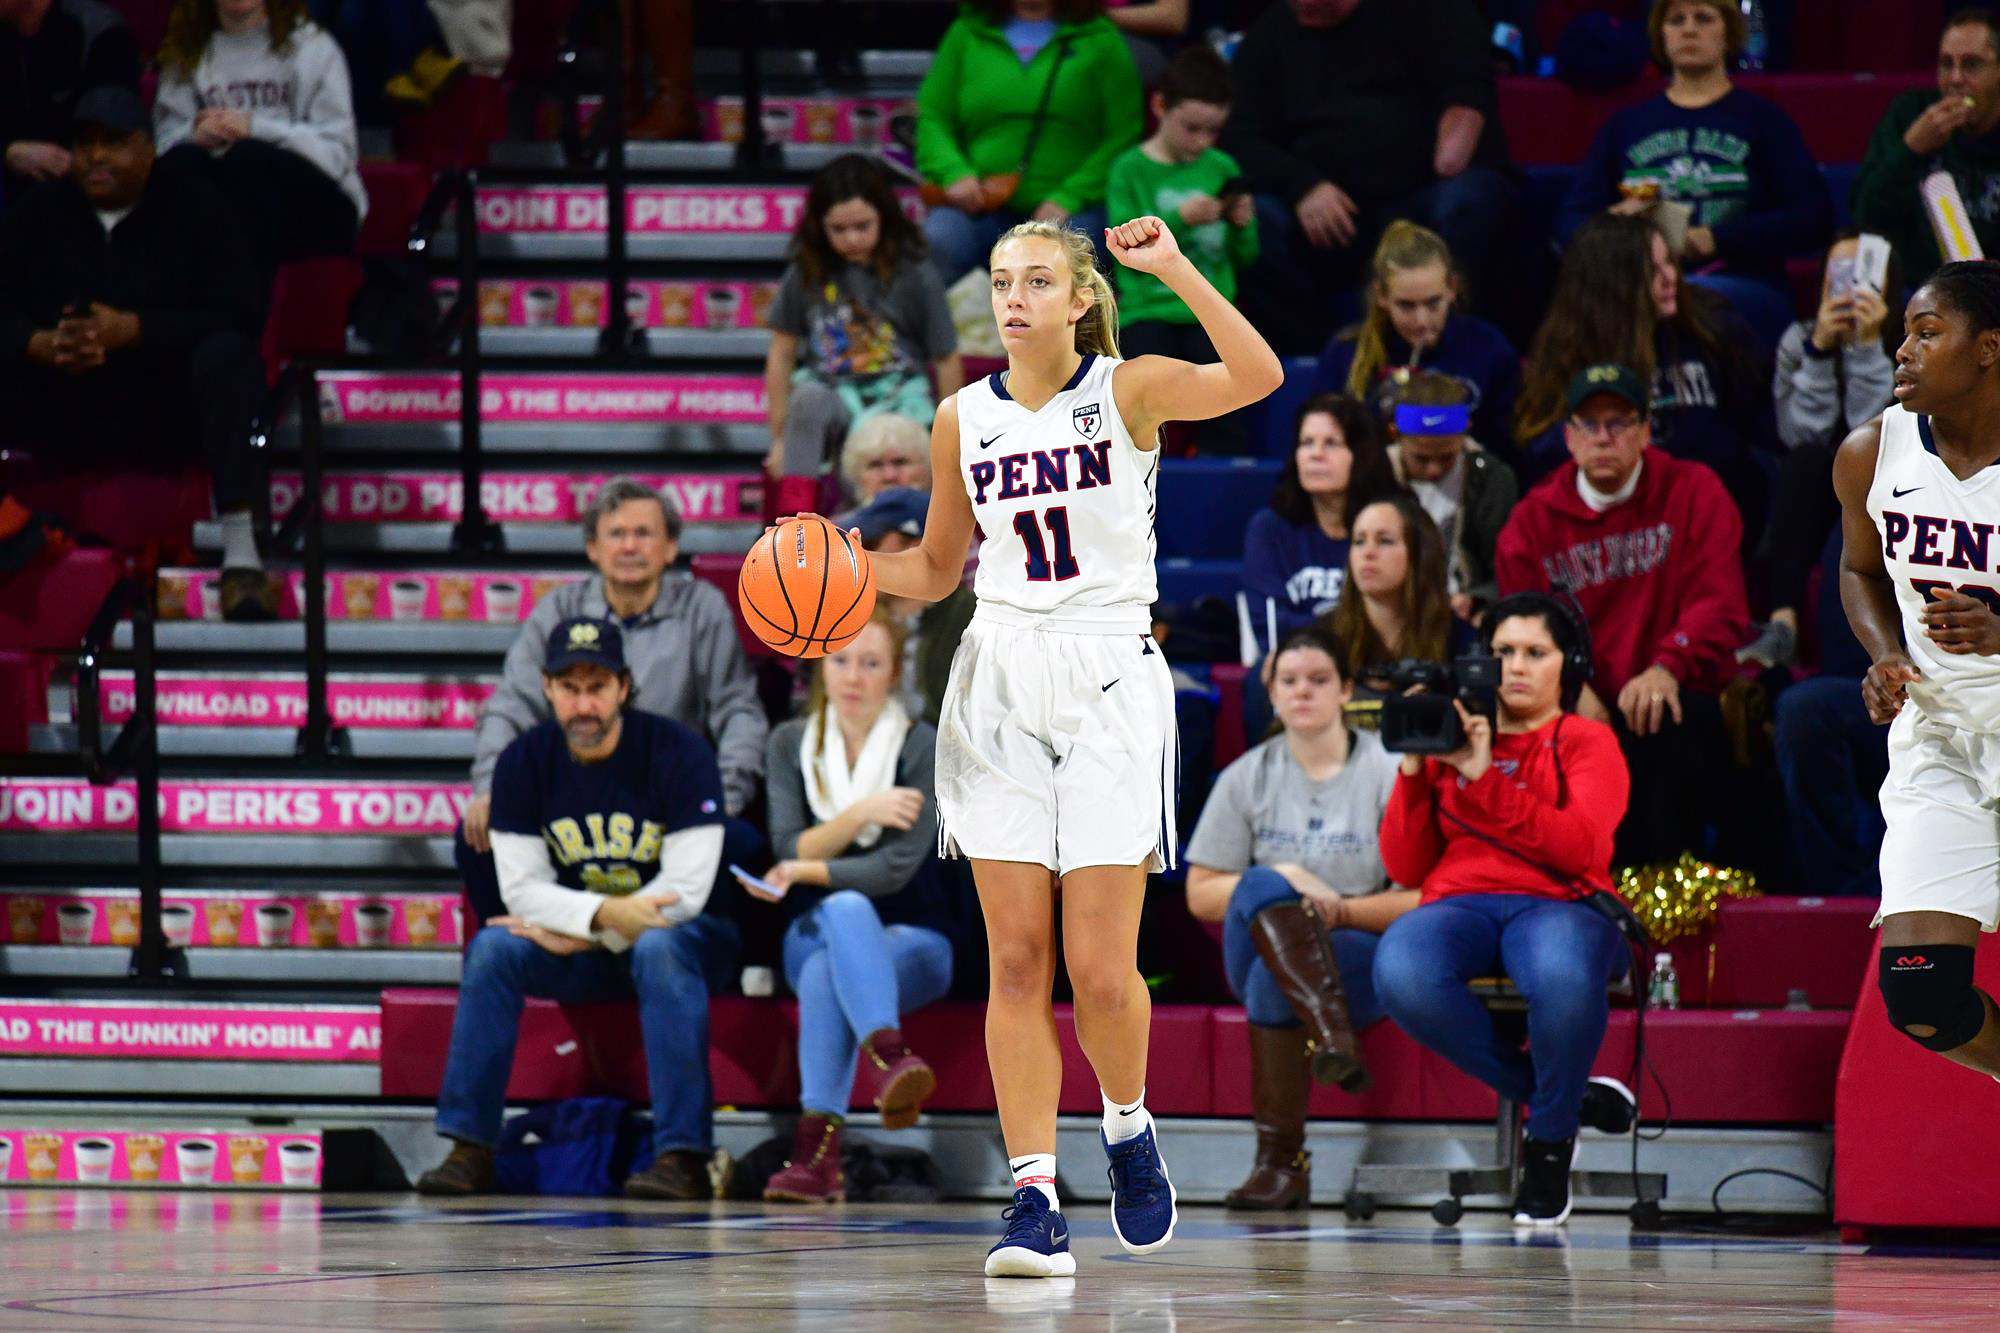 At the Palestra, Kendell Grasela makes a fist while dribbling the ball up the court.